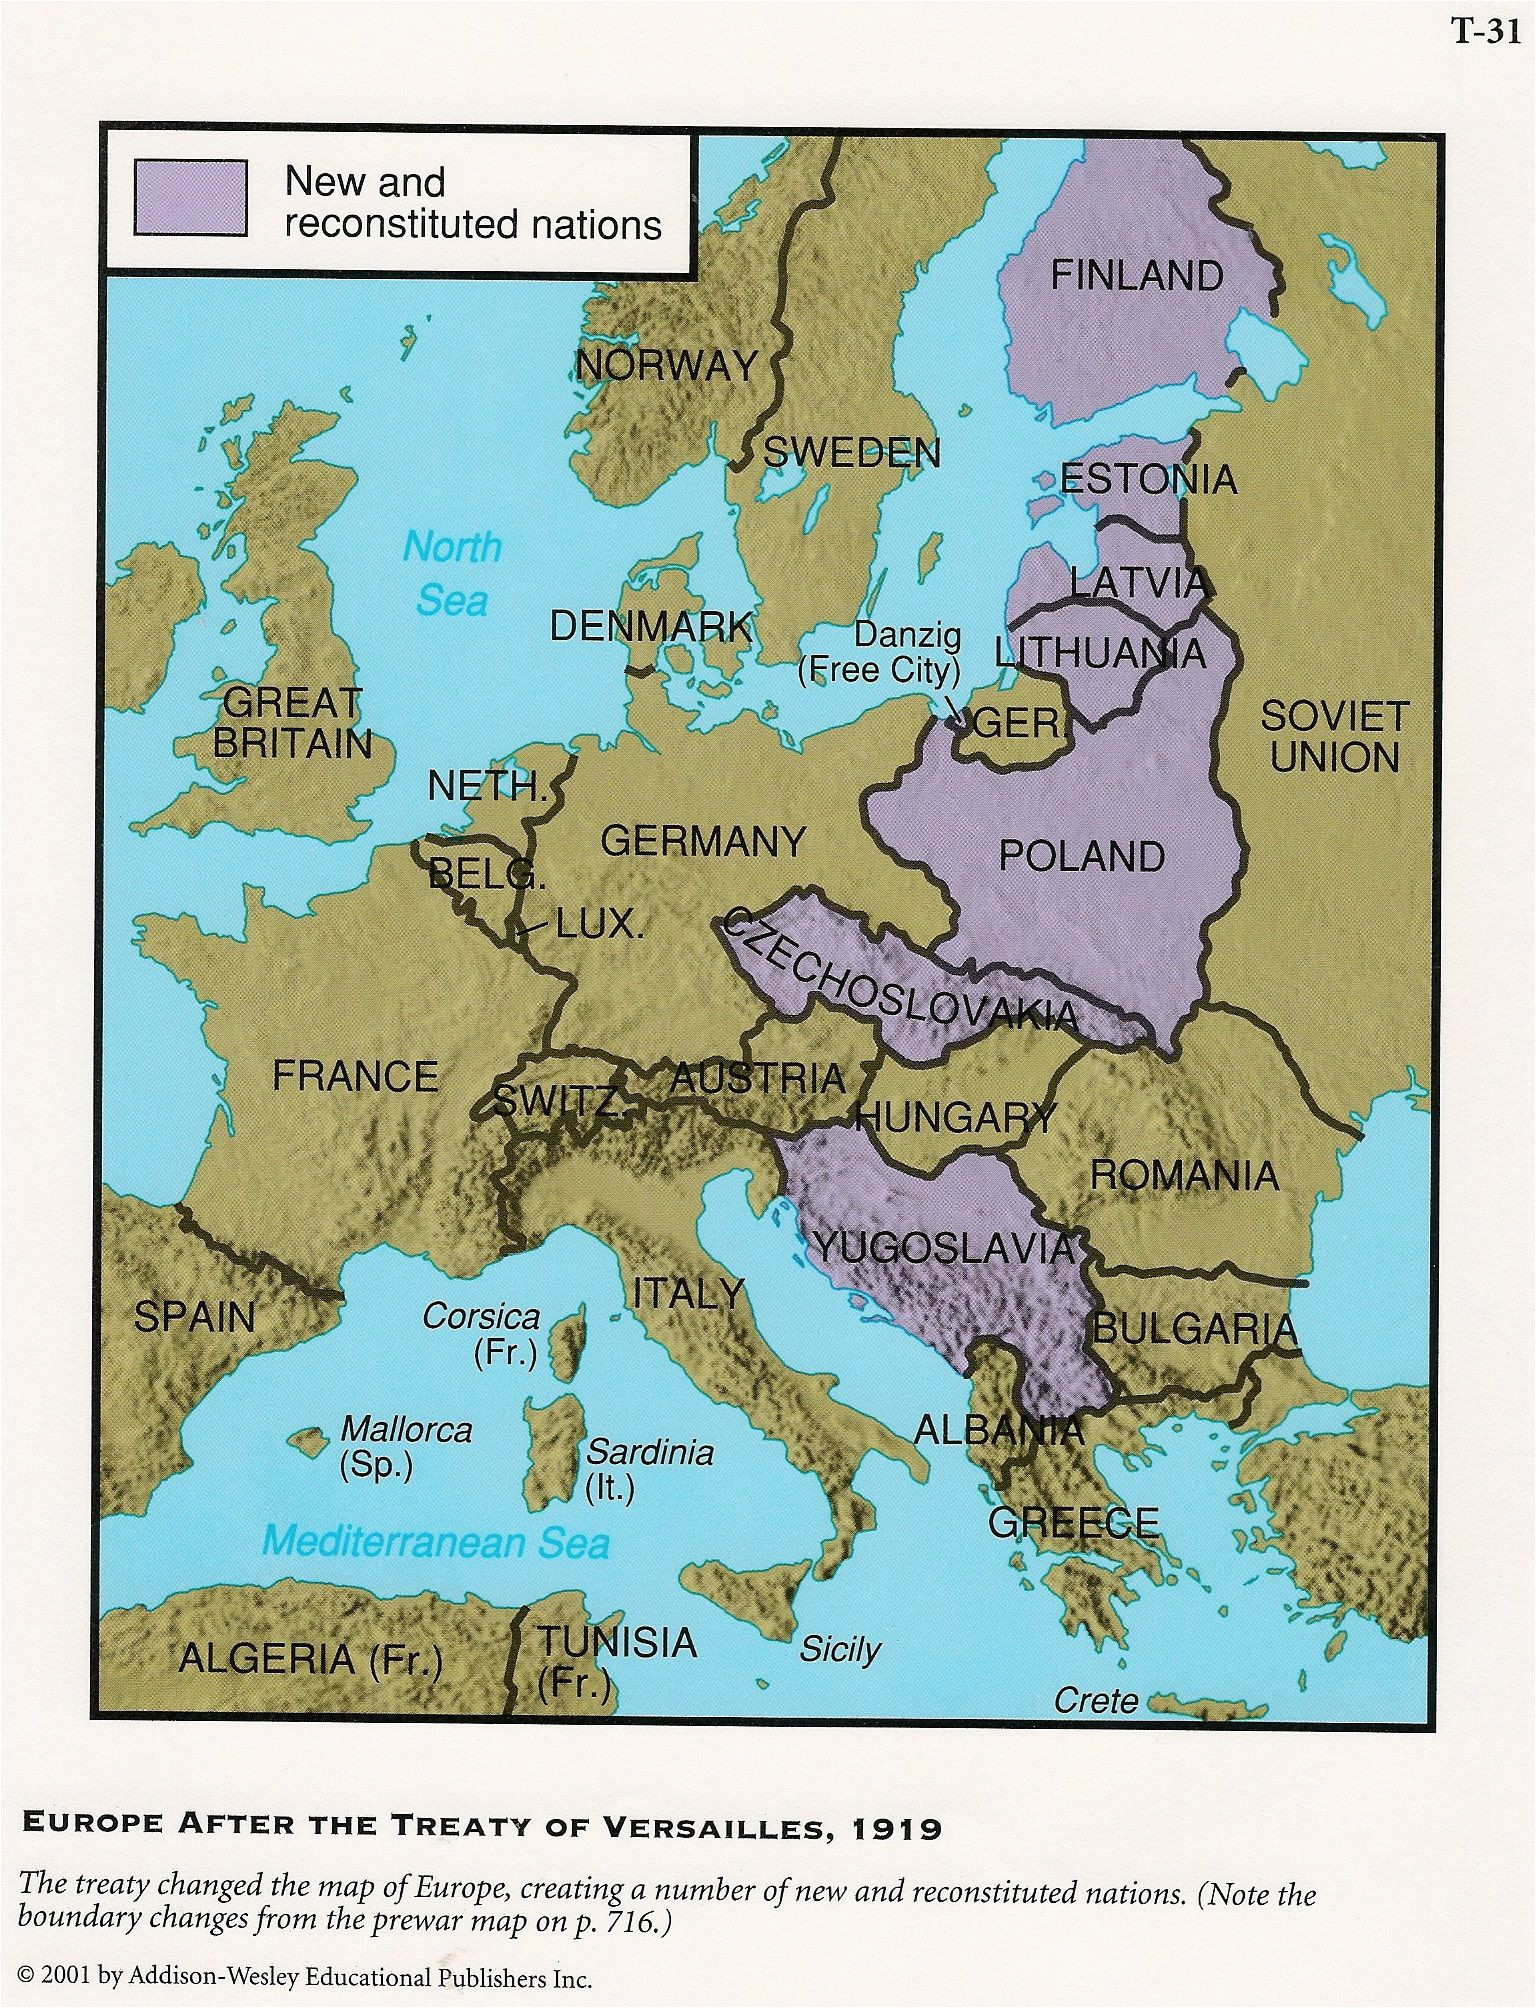 this is a picture of a map of europe after the treaty of